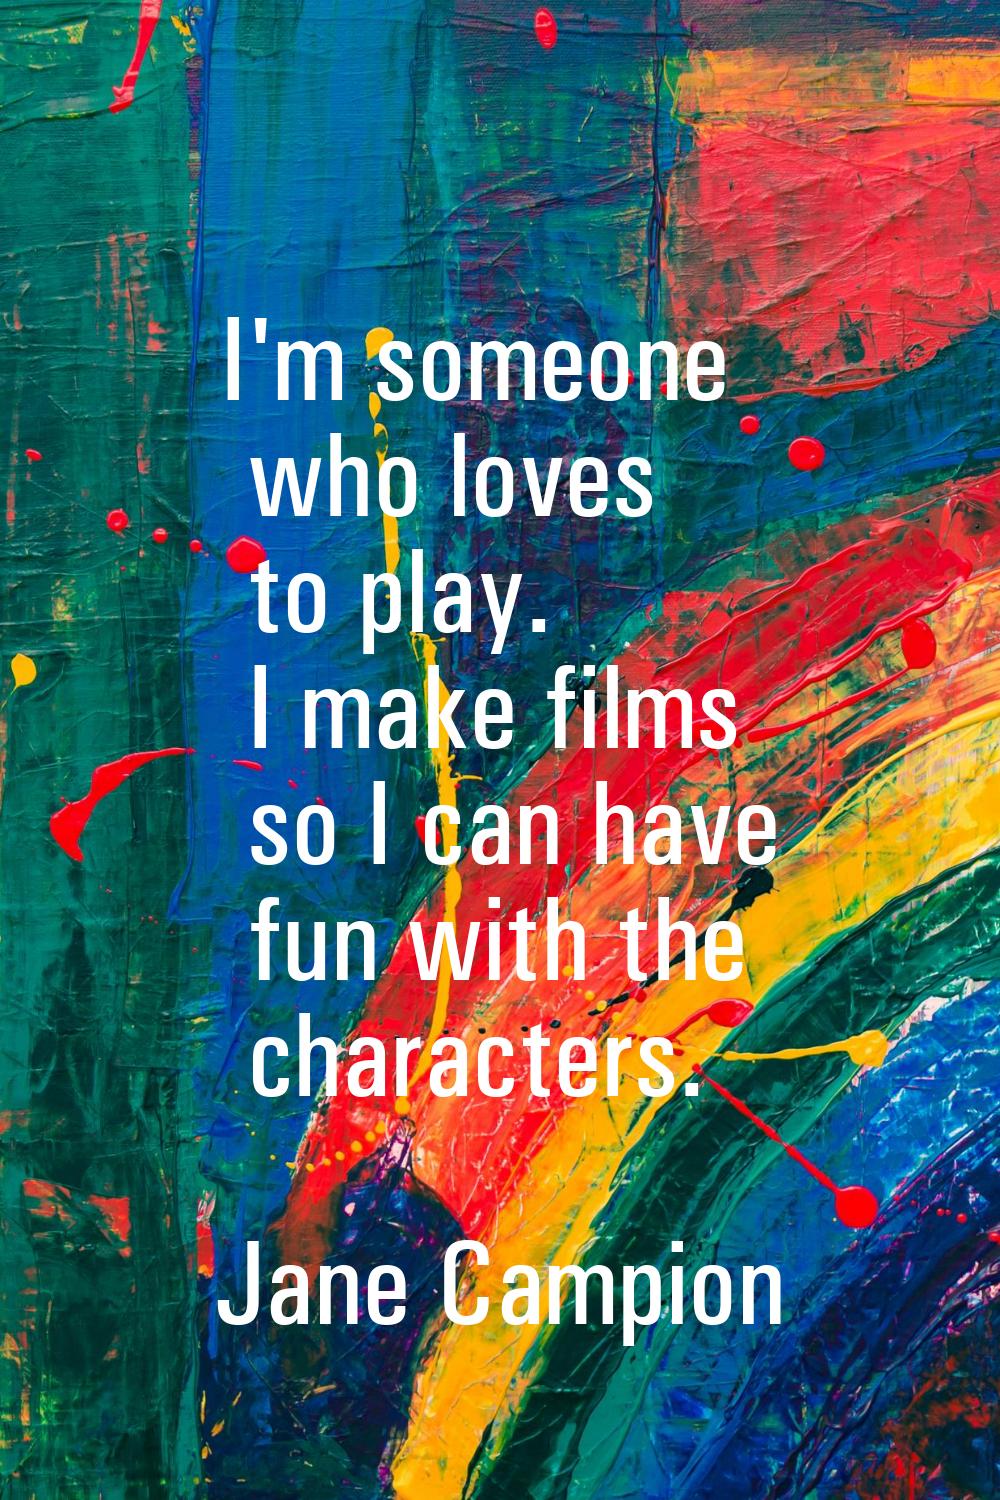 I'm someone who loves to play. I make films so I can have fun with the characters.